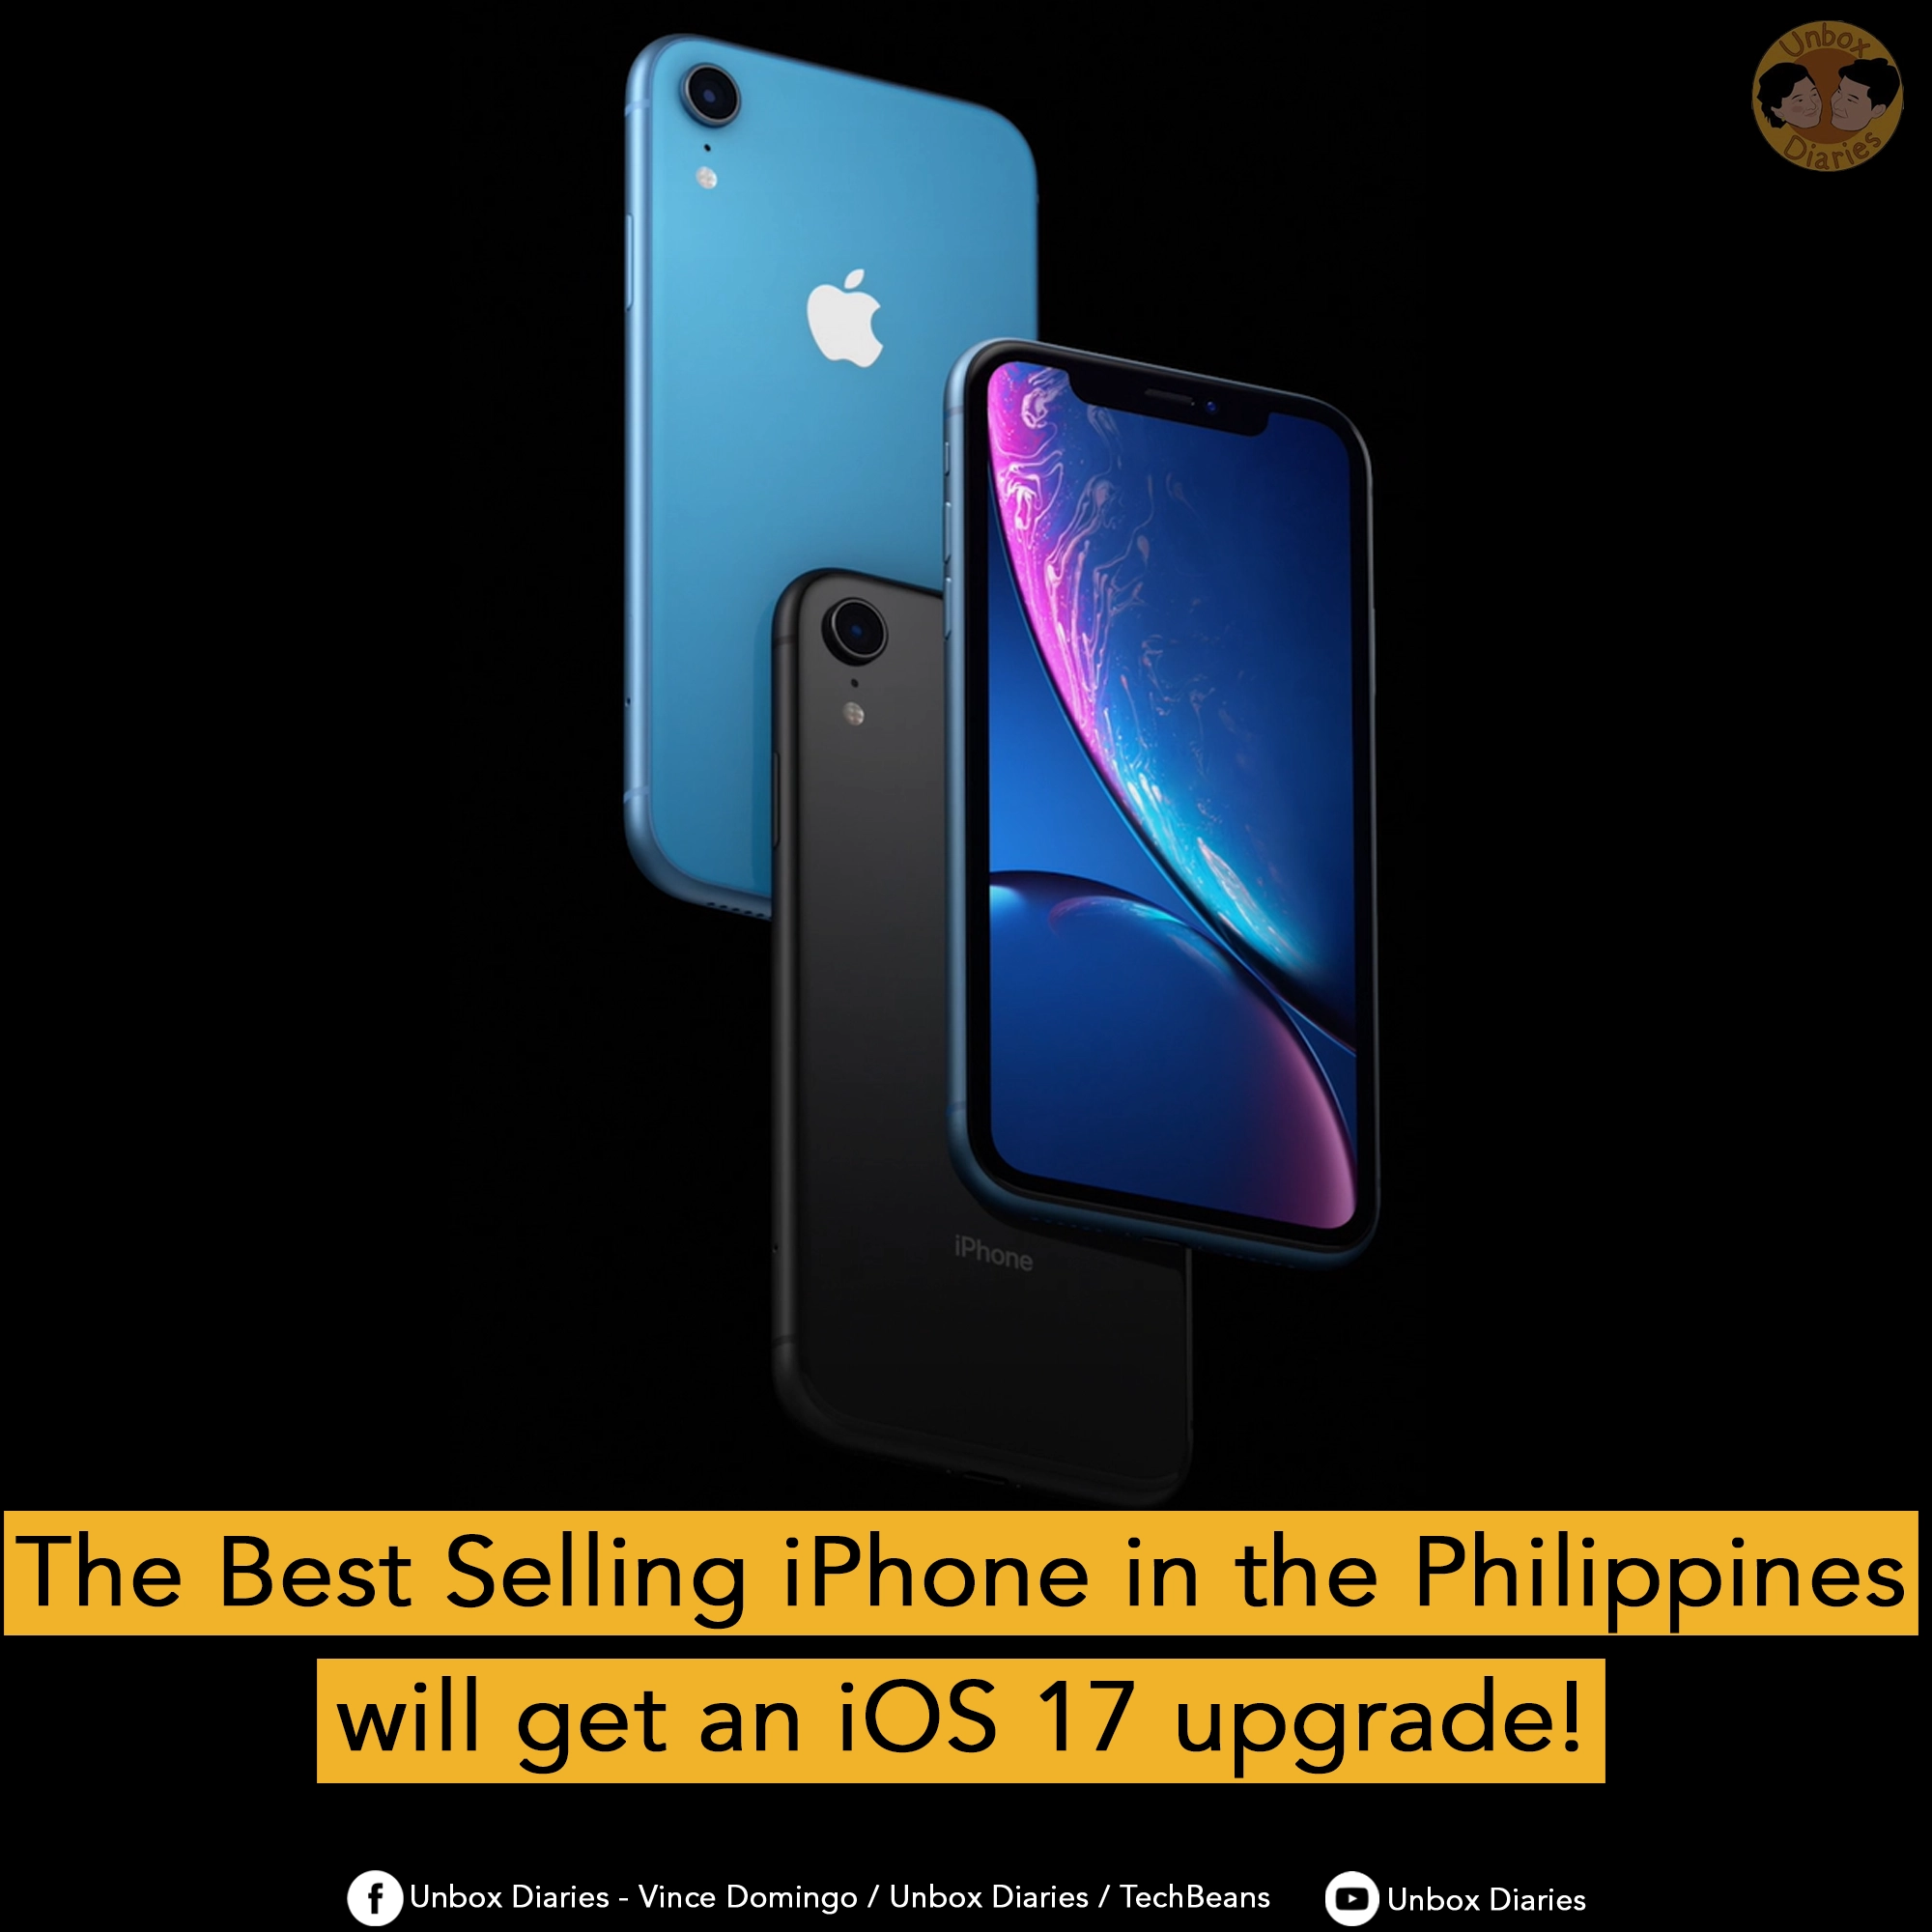 Rumors and Speculations about iPhone XR and iOS 17